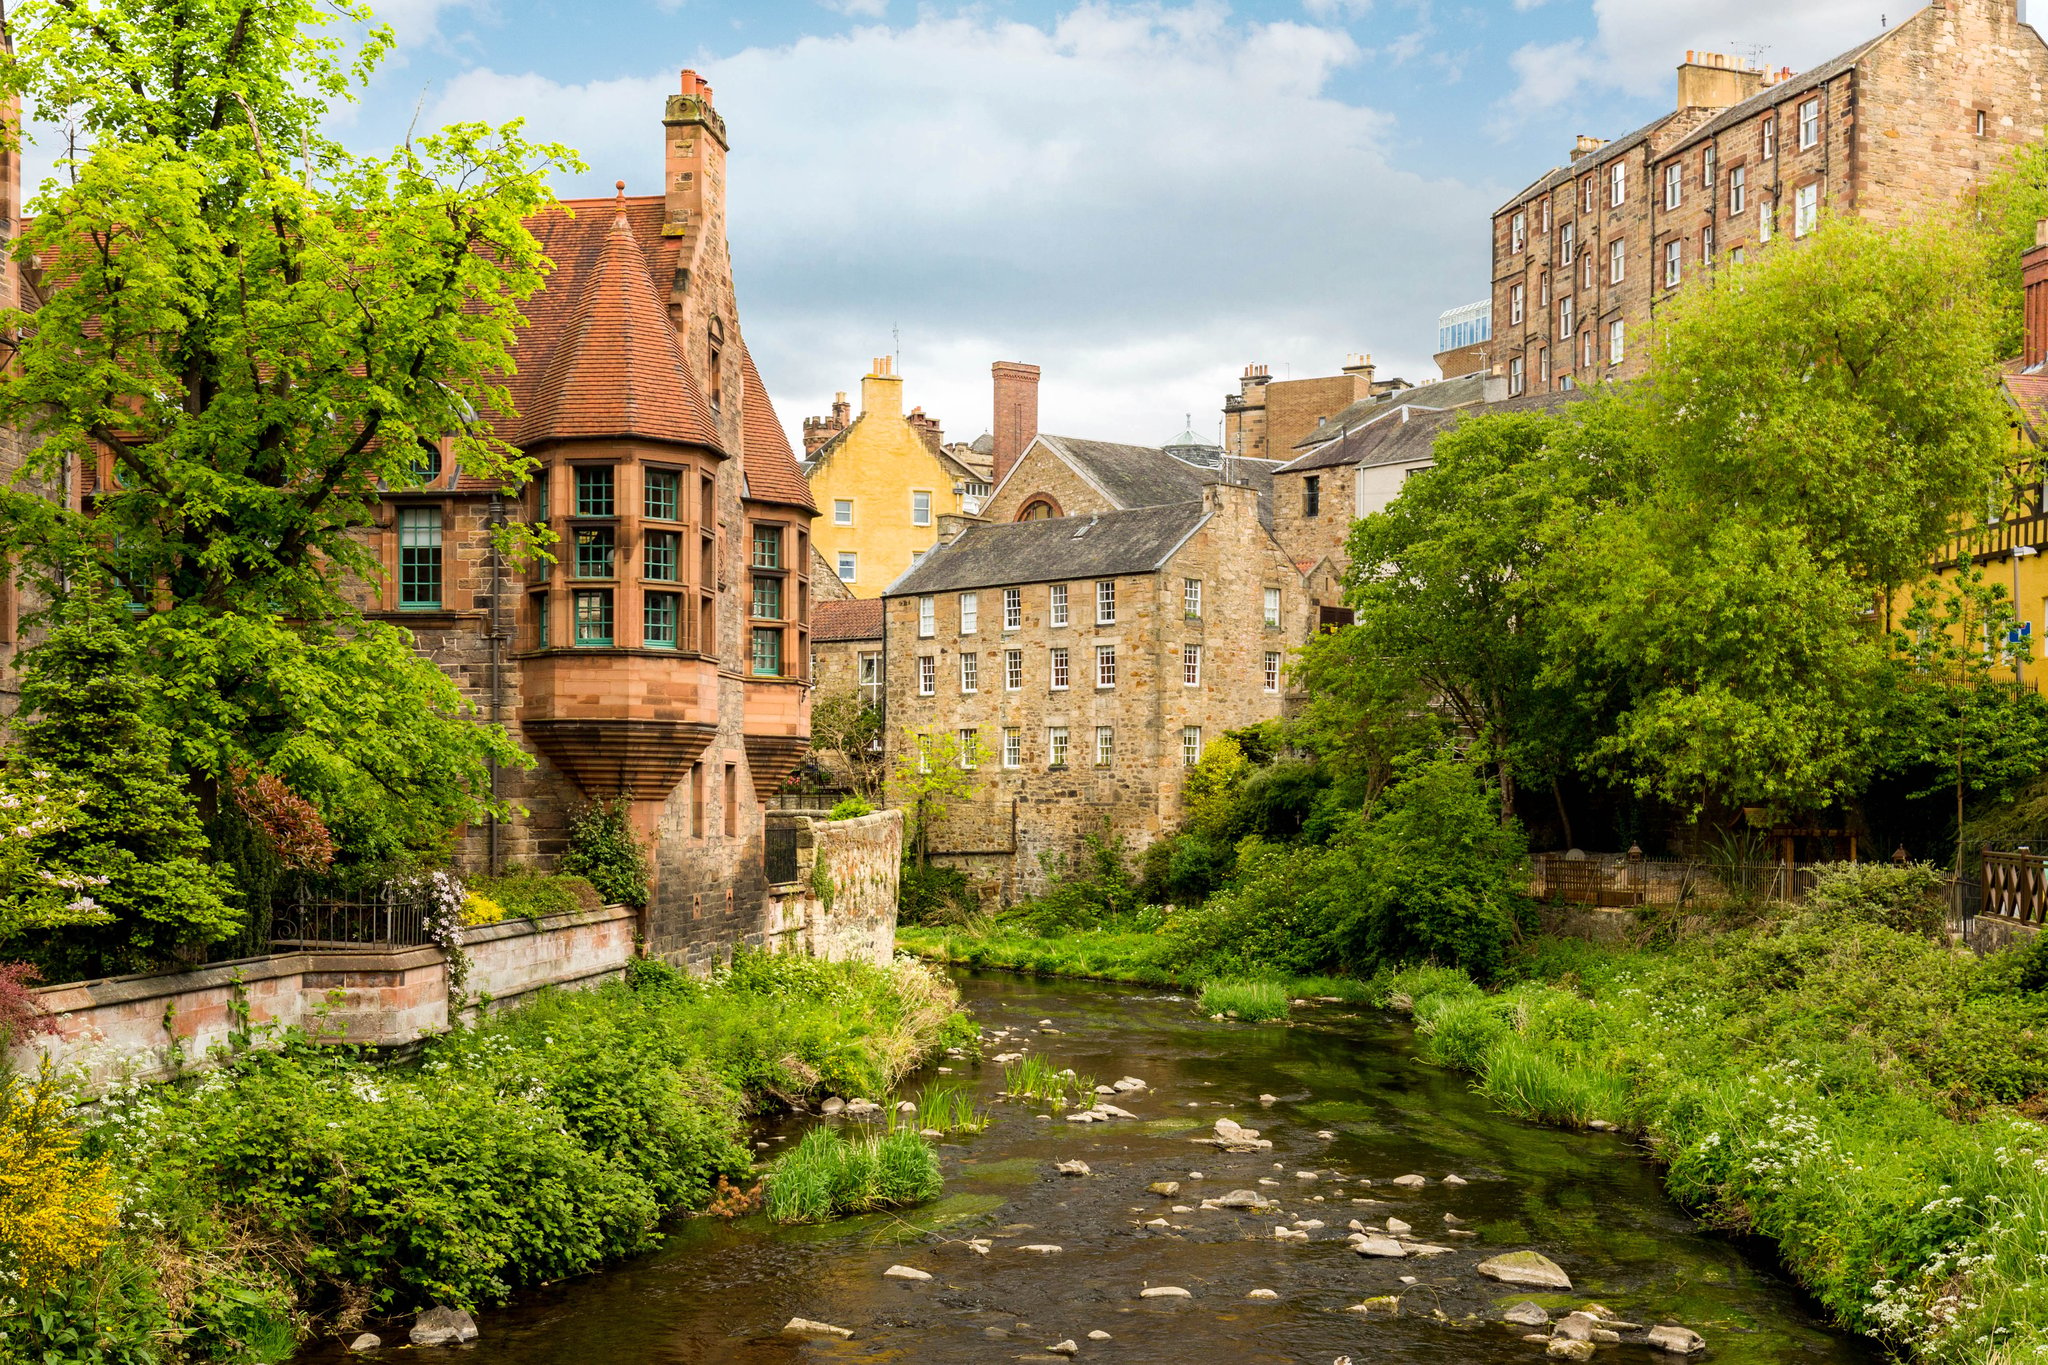 Image of the Water of Leith at the Dean Village